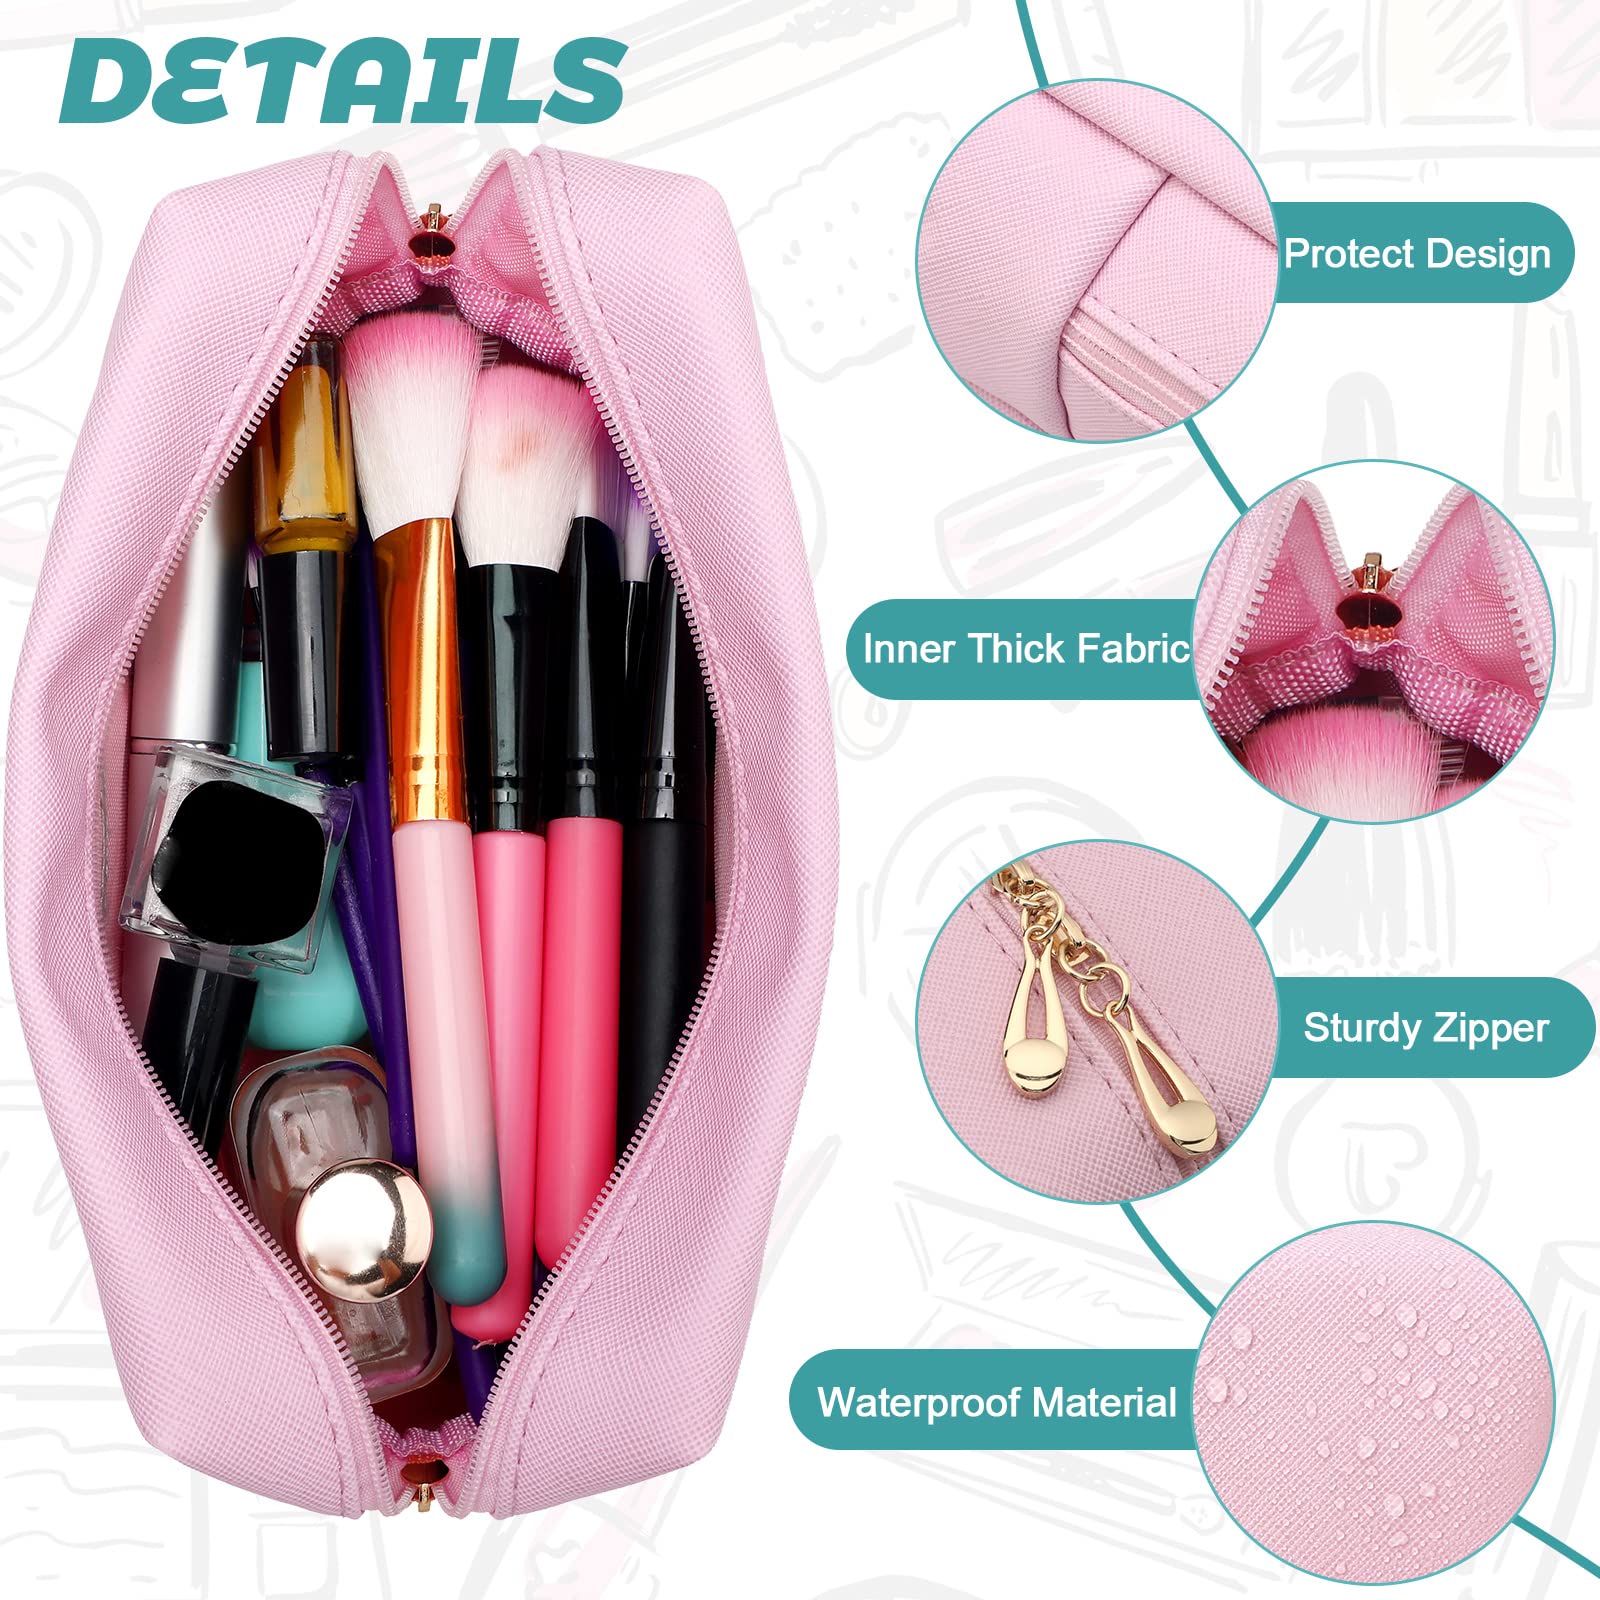 4 Pieces Preppy Patch Small Cosmetic Bag Preppy Makeup Bag PU Leather Portable Waterproof Makeup Organizer Bag Preppy Pouch Makeup Accessories (Face)